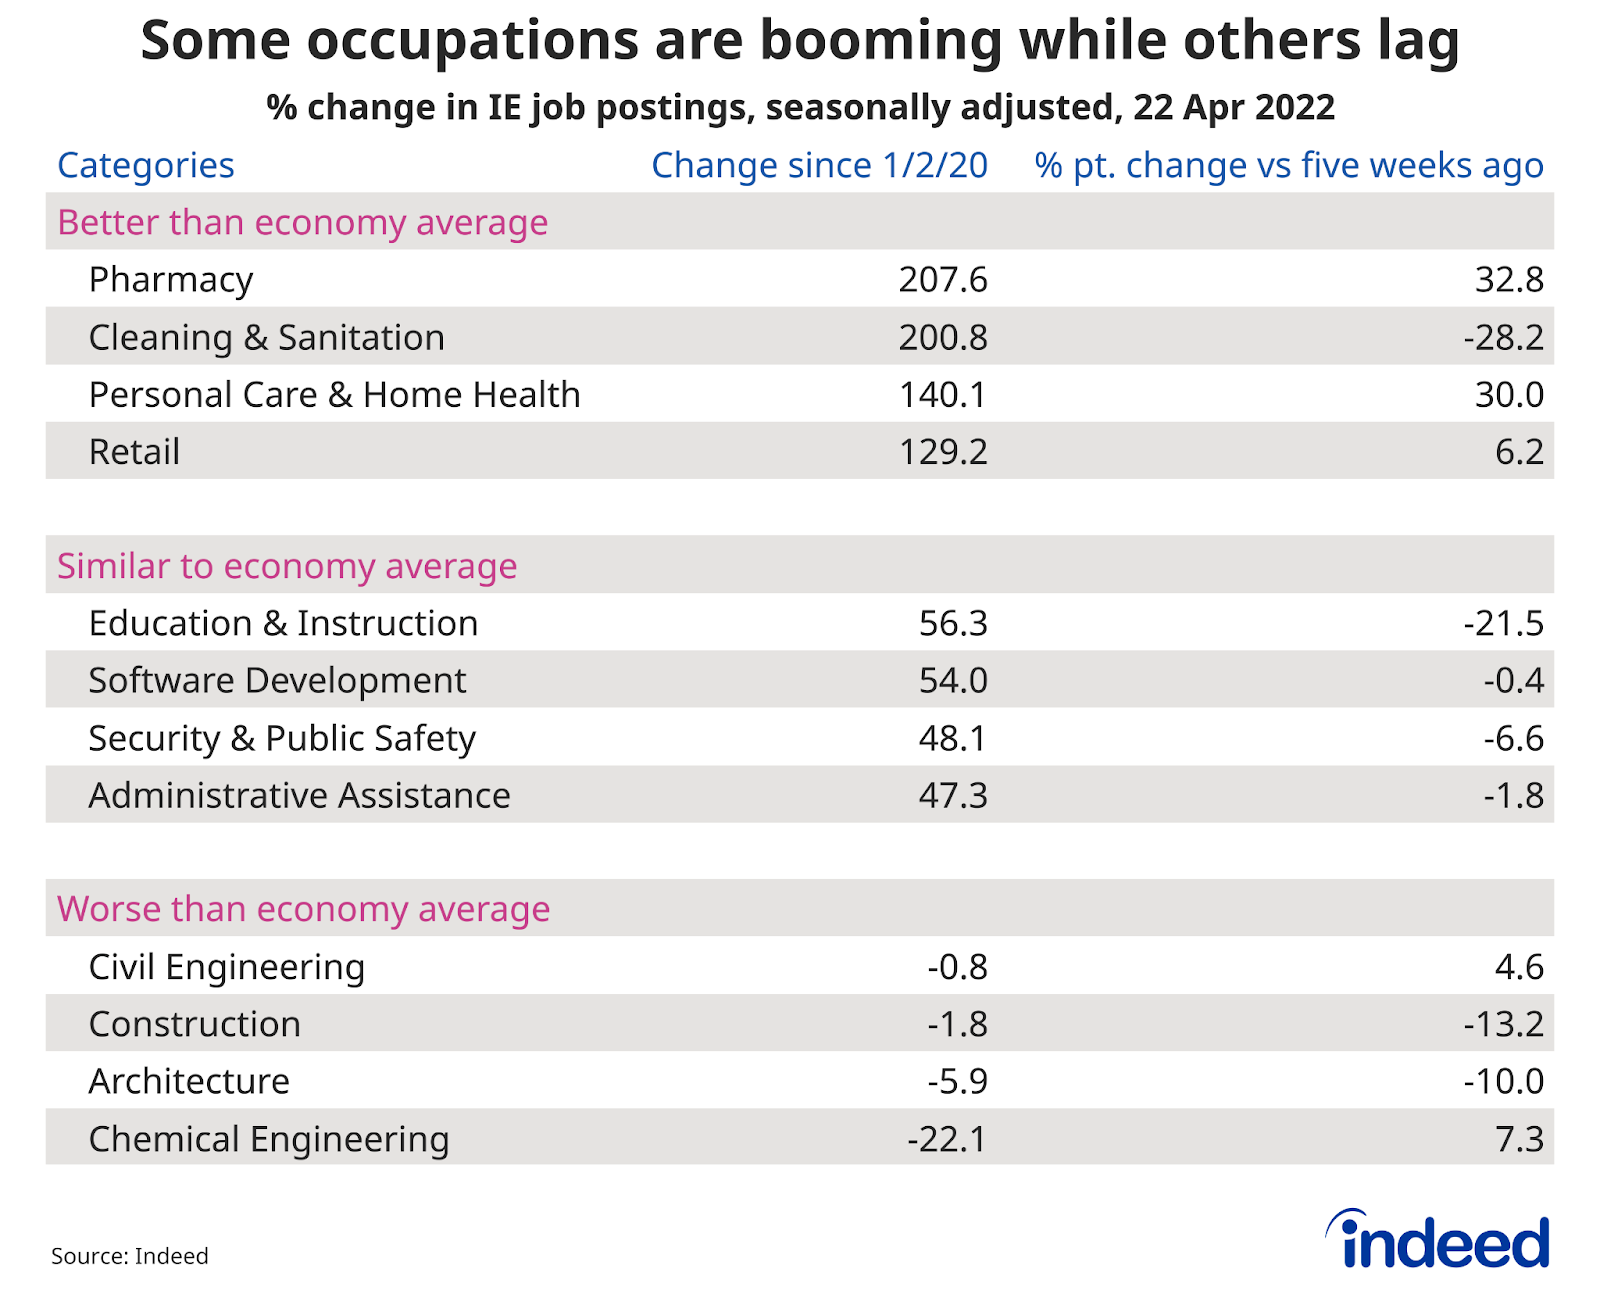 Table titled “Some occupations are booming while others lag.”